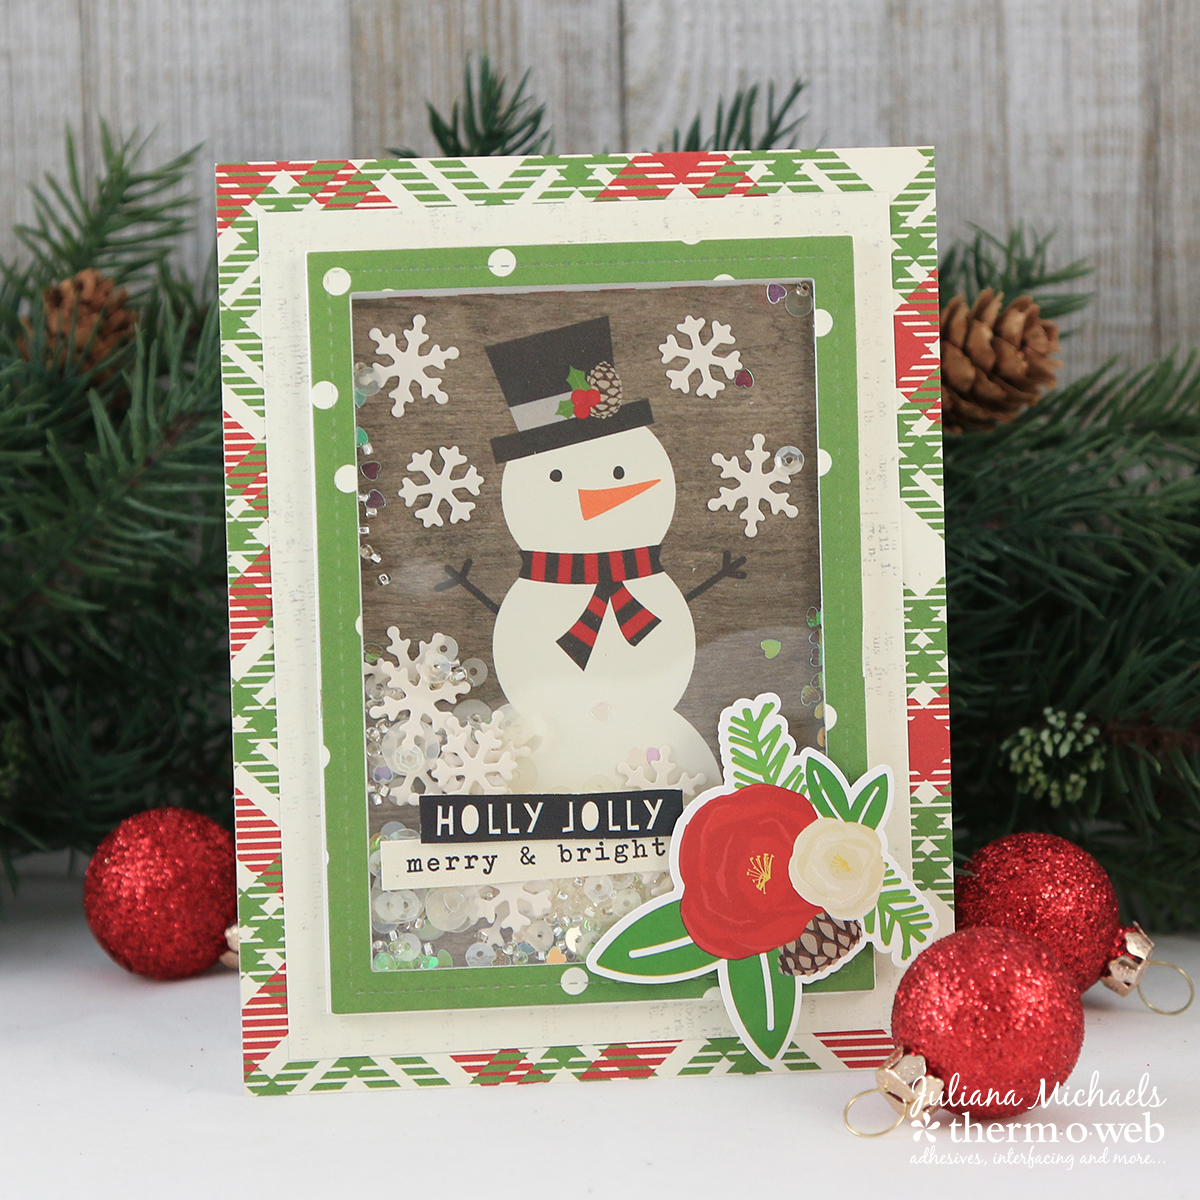 Snowman Shaker Cards by Juliana Michaels featuring Therm O Web Adhesives